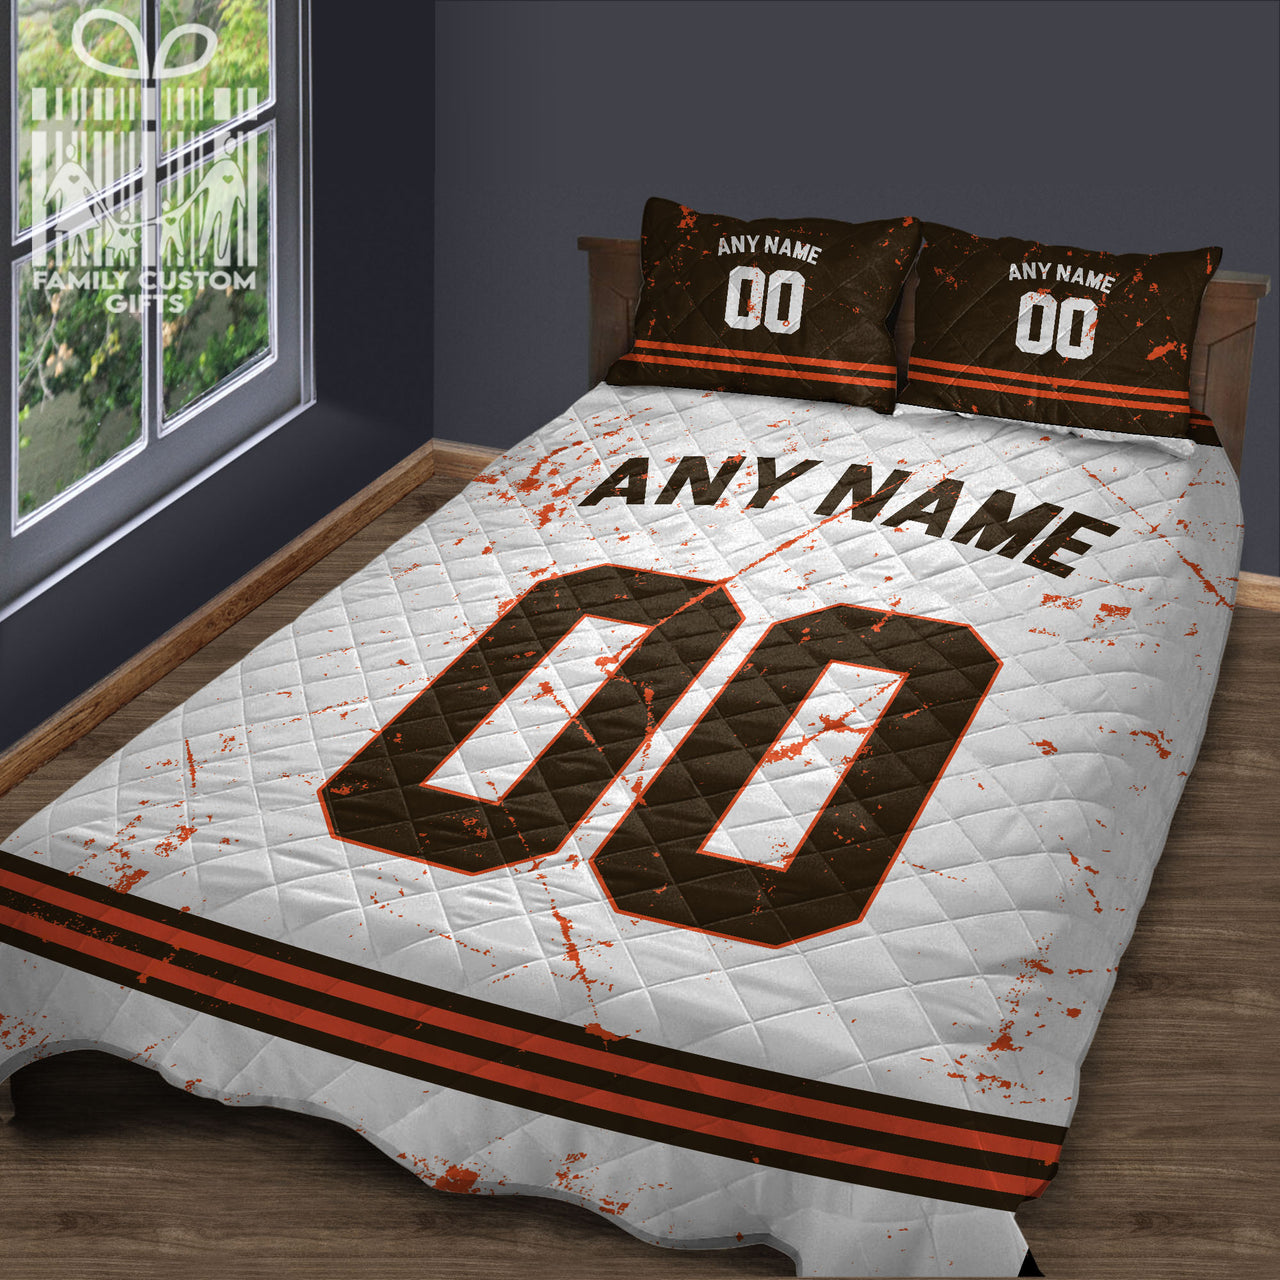 Custom Quilt Sets Cleveland Jersey Personalized Football Premium Quilt Bedding for Men Women